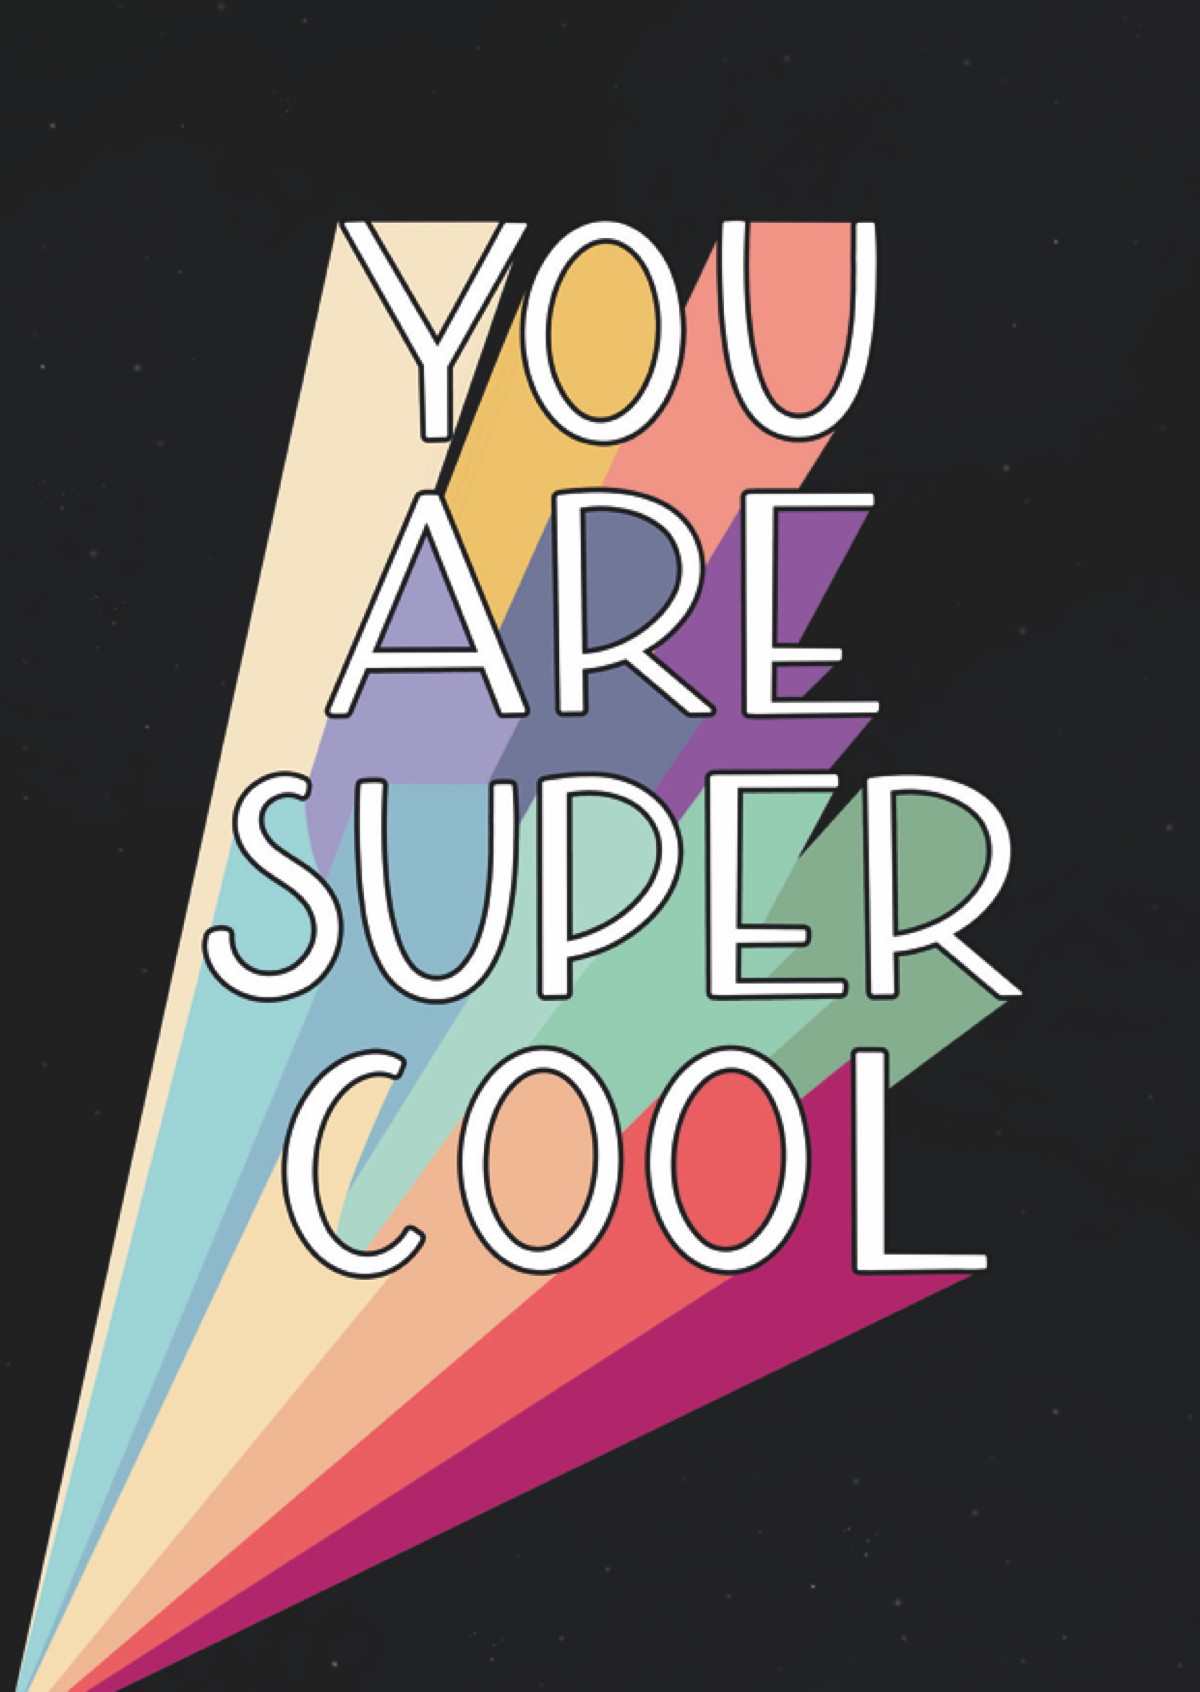 You are super cool